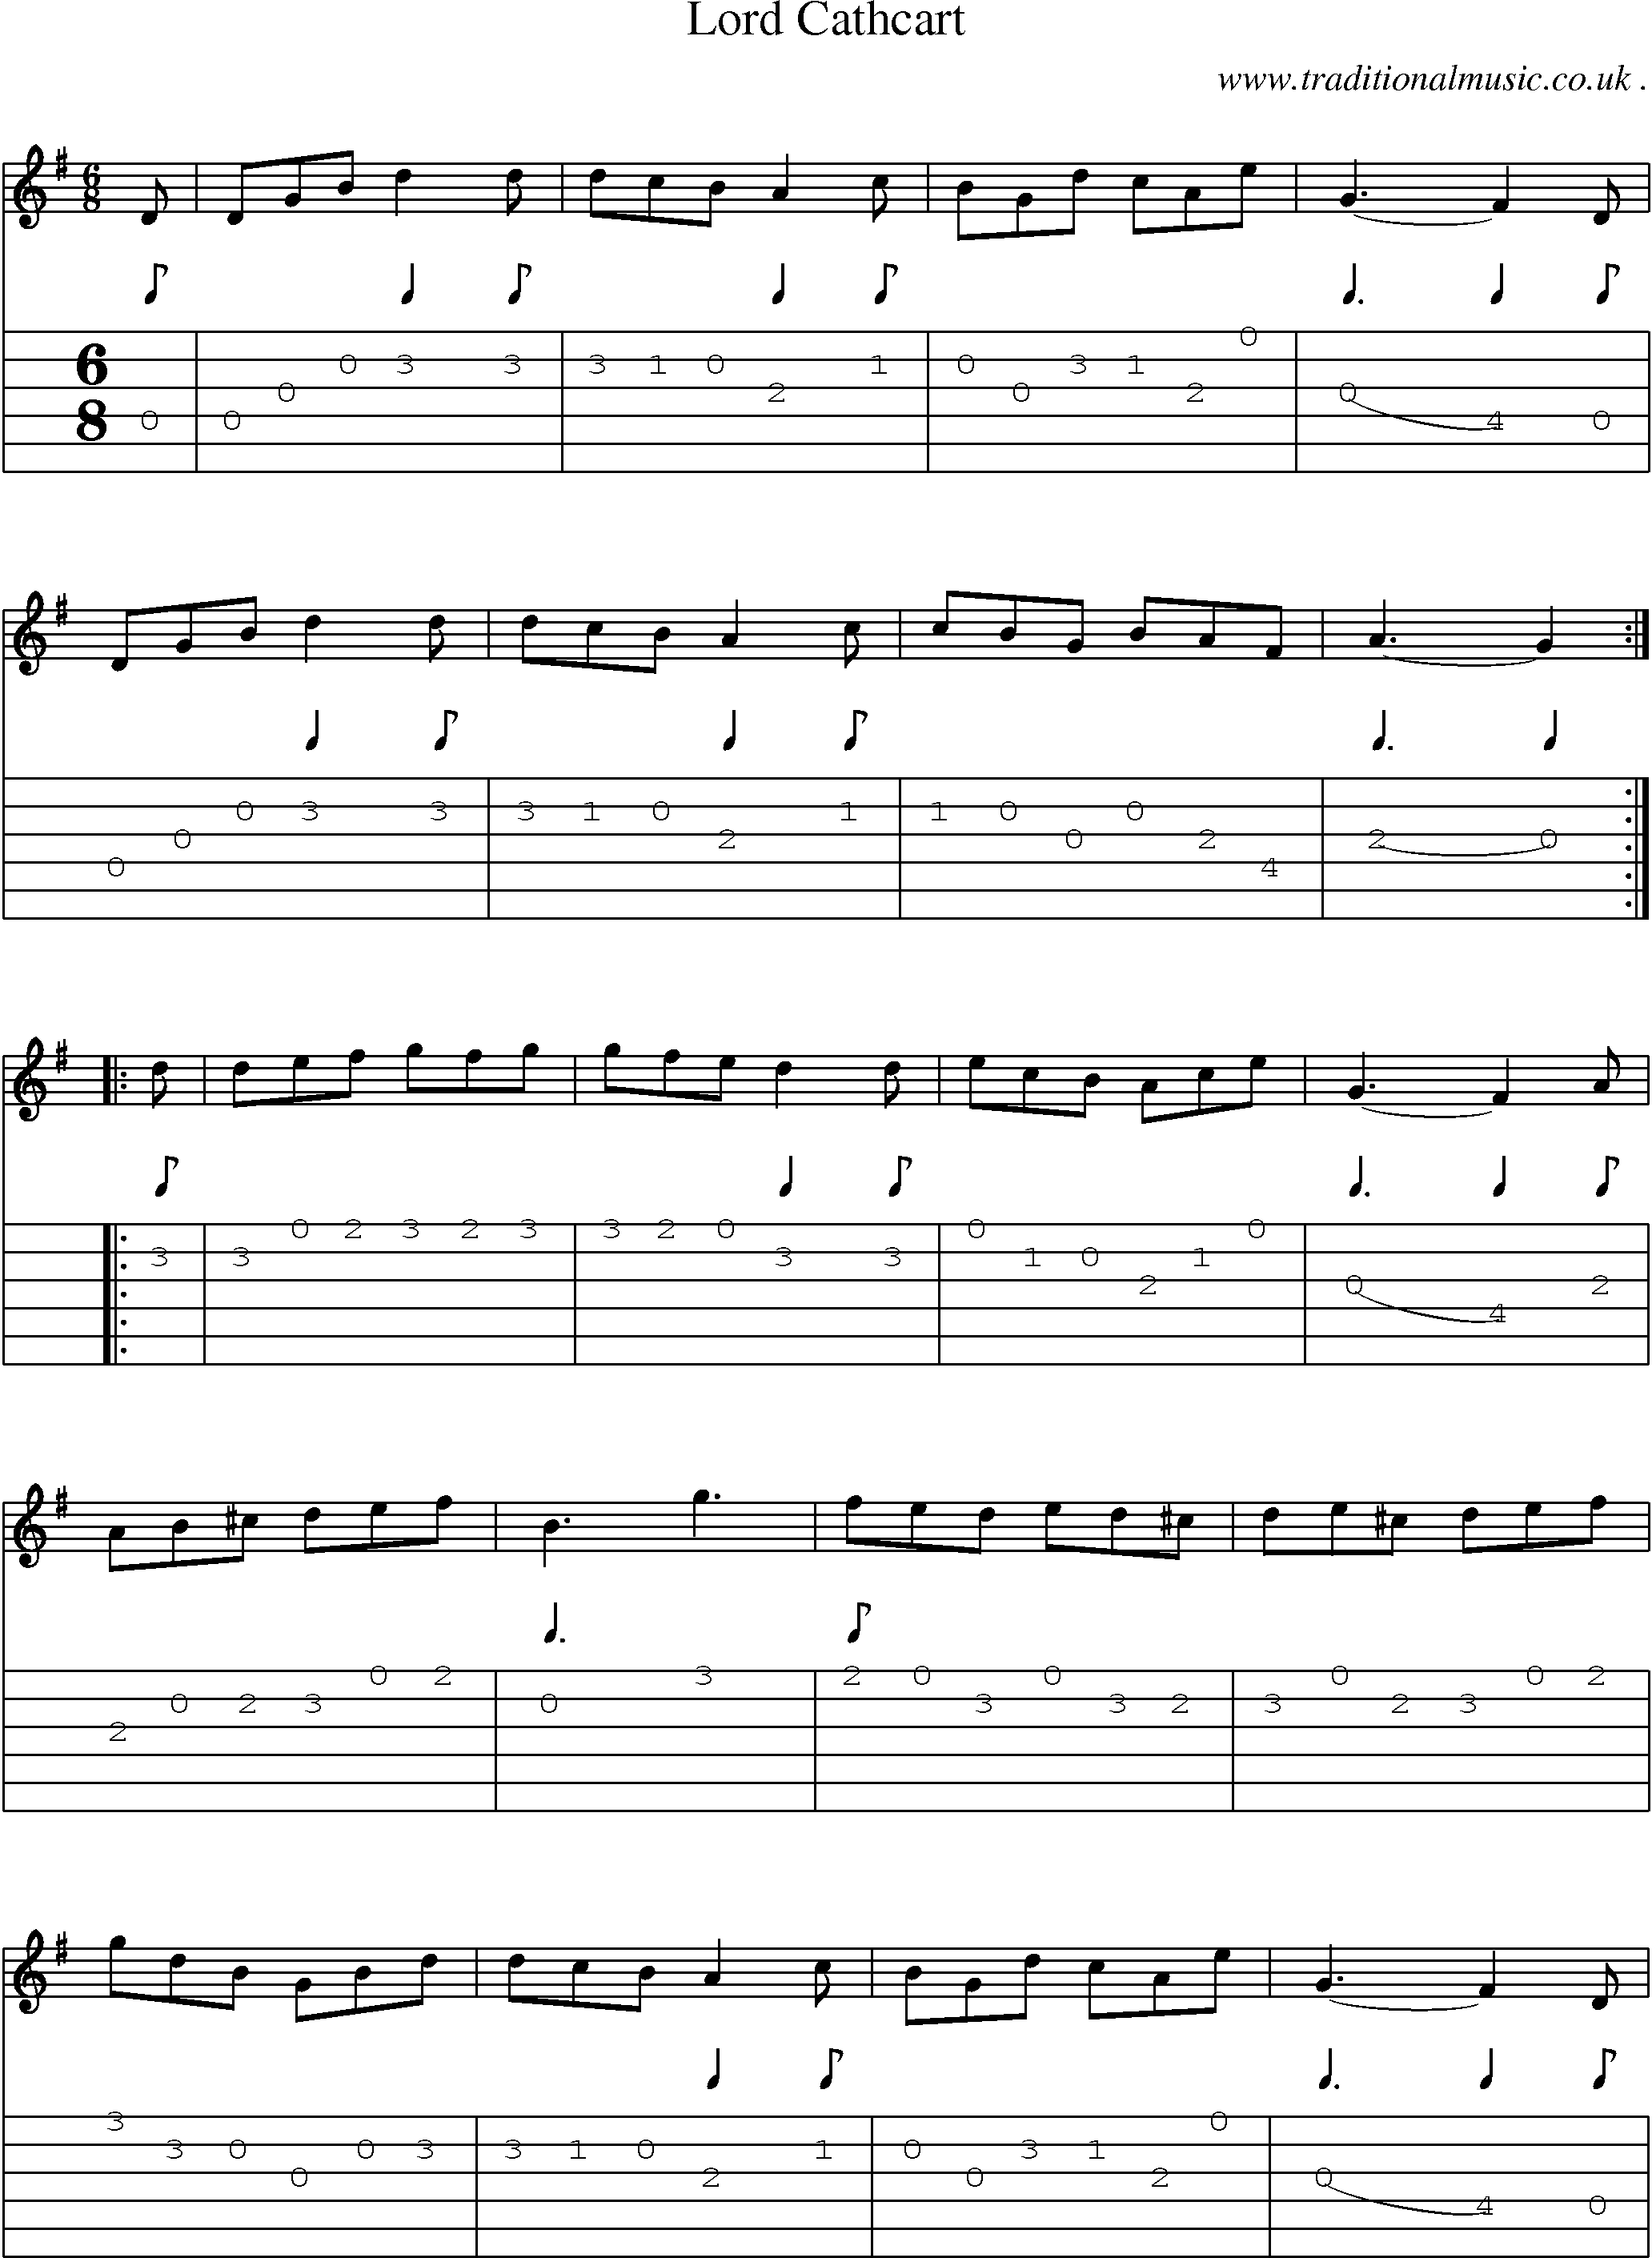 Sheet-Music and Guitar Tabs for Lord Cathcart